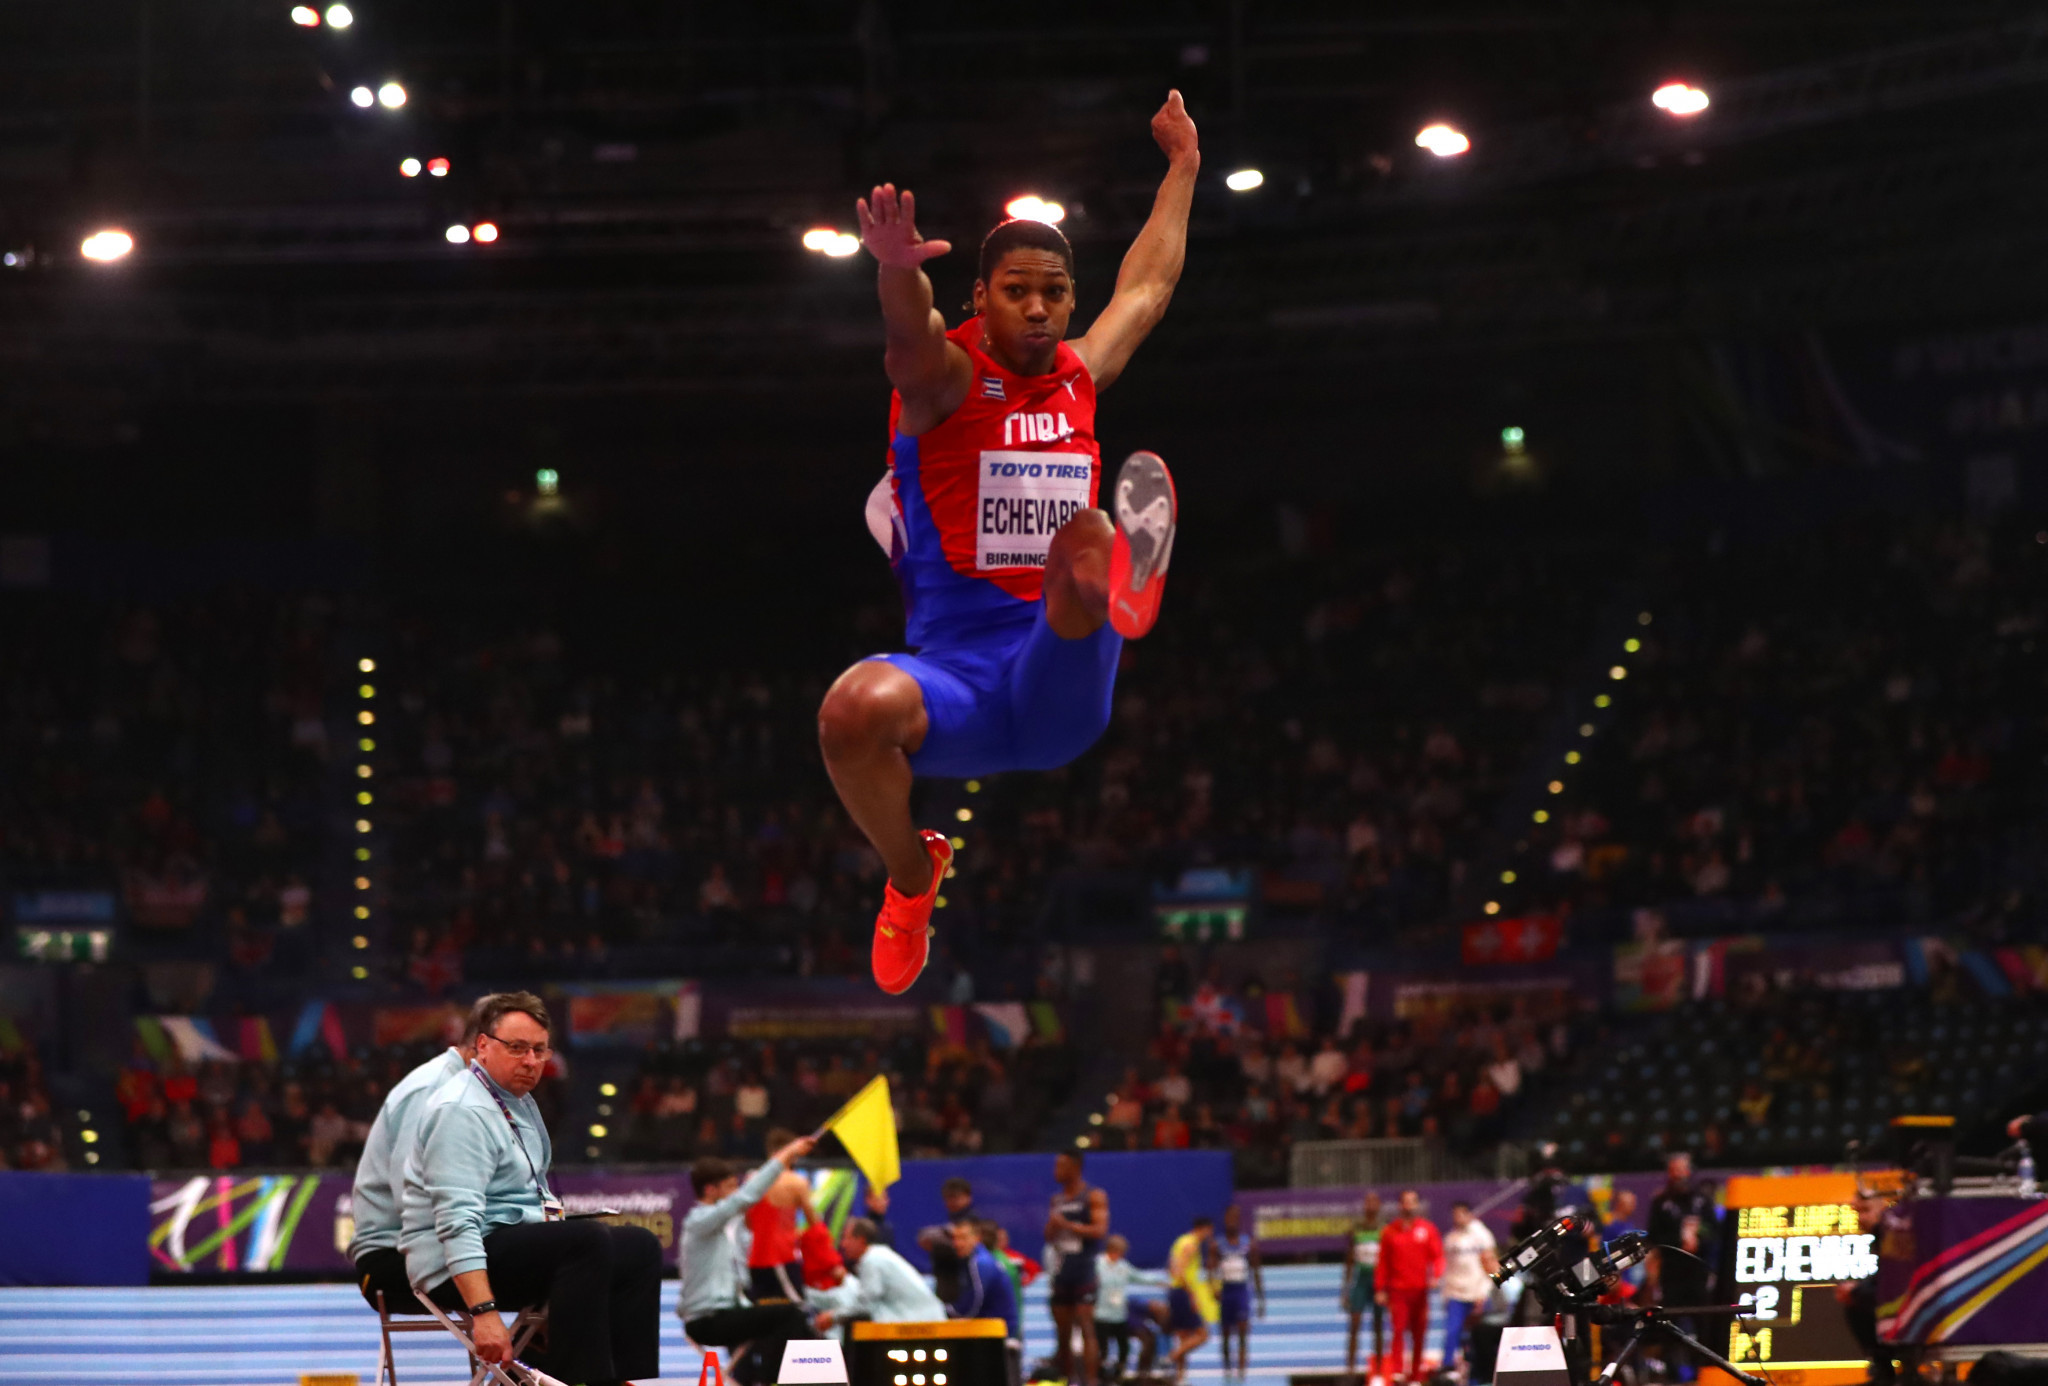 Cuban long jumper Juan Miguel Echevarria’s first appearance of the year is expected to be among the main highlights of the IAAF World Indoor Tour event in Karlsruhe ©Getty Images